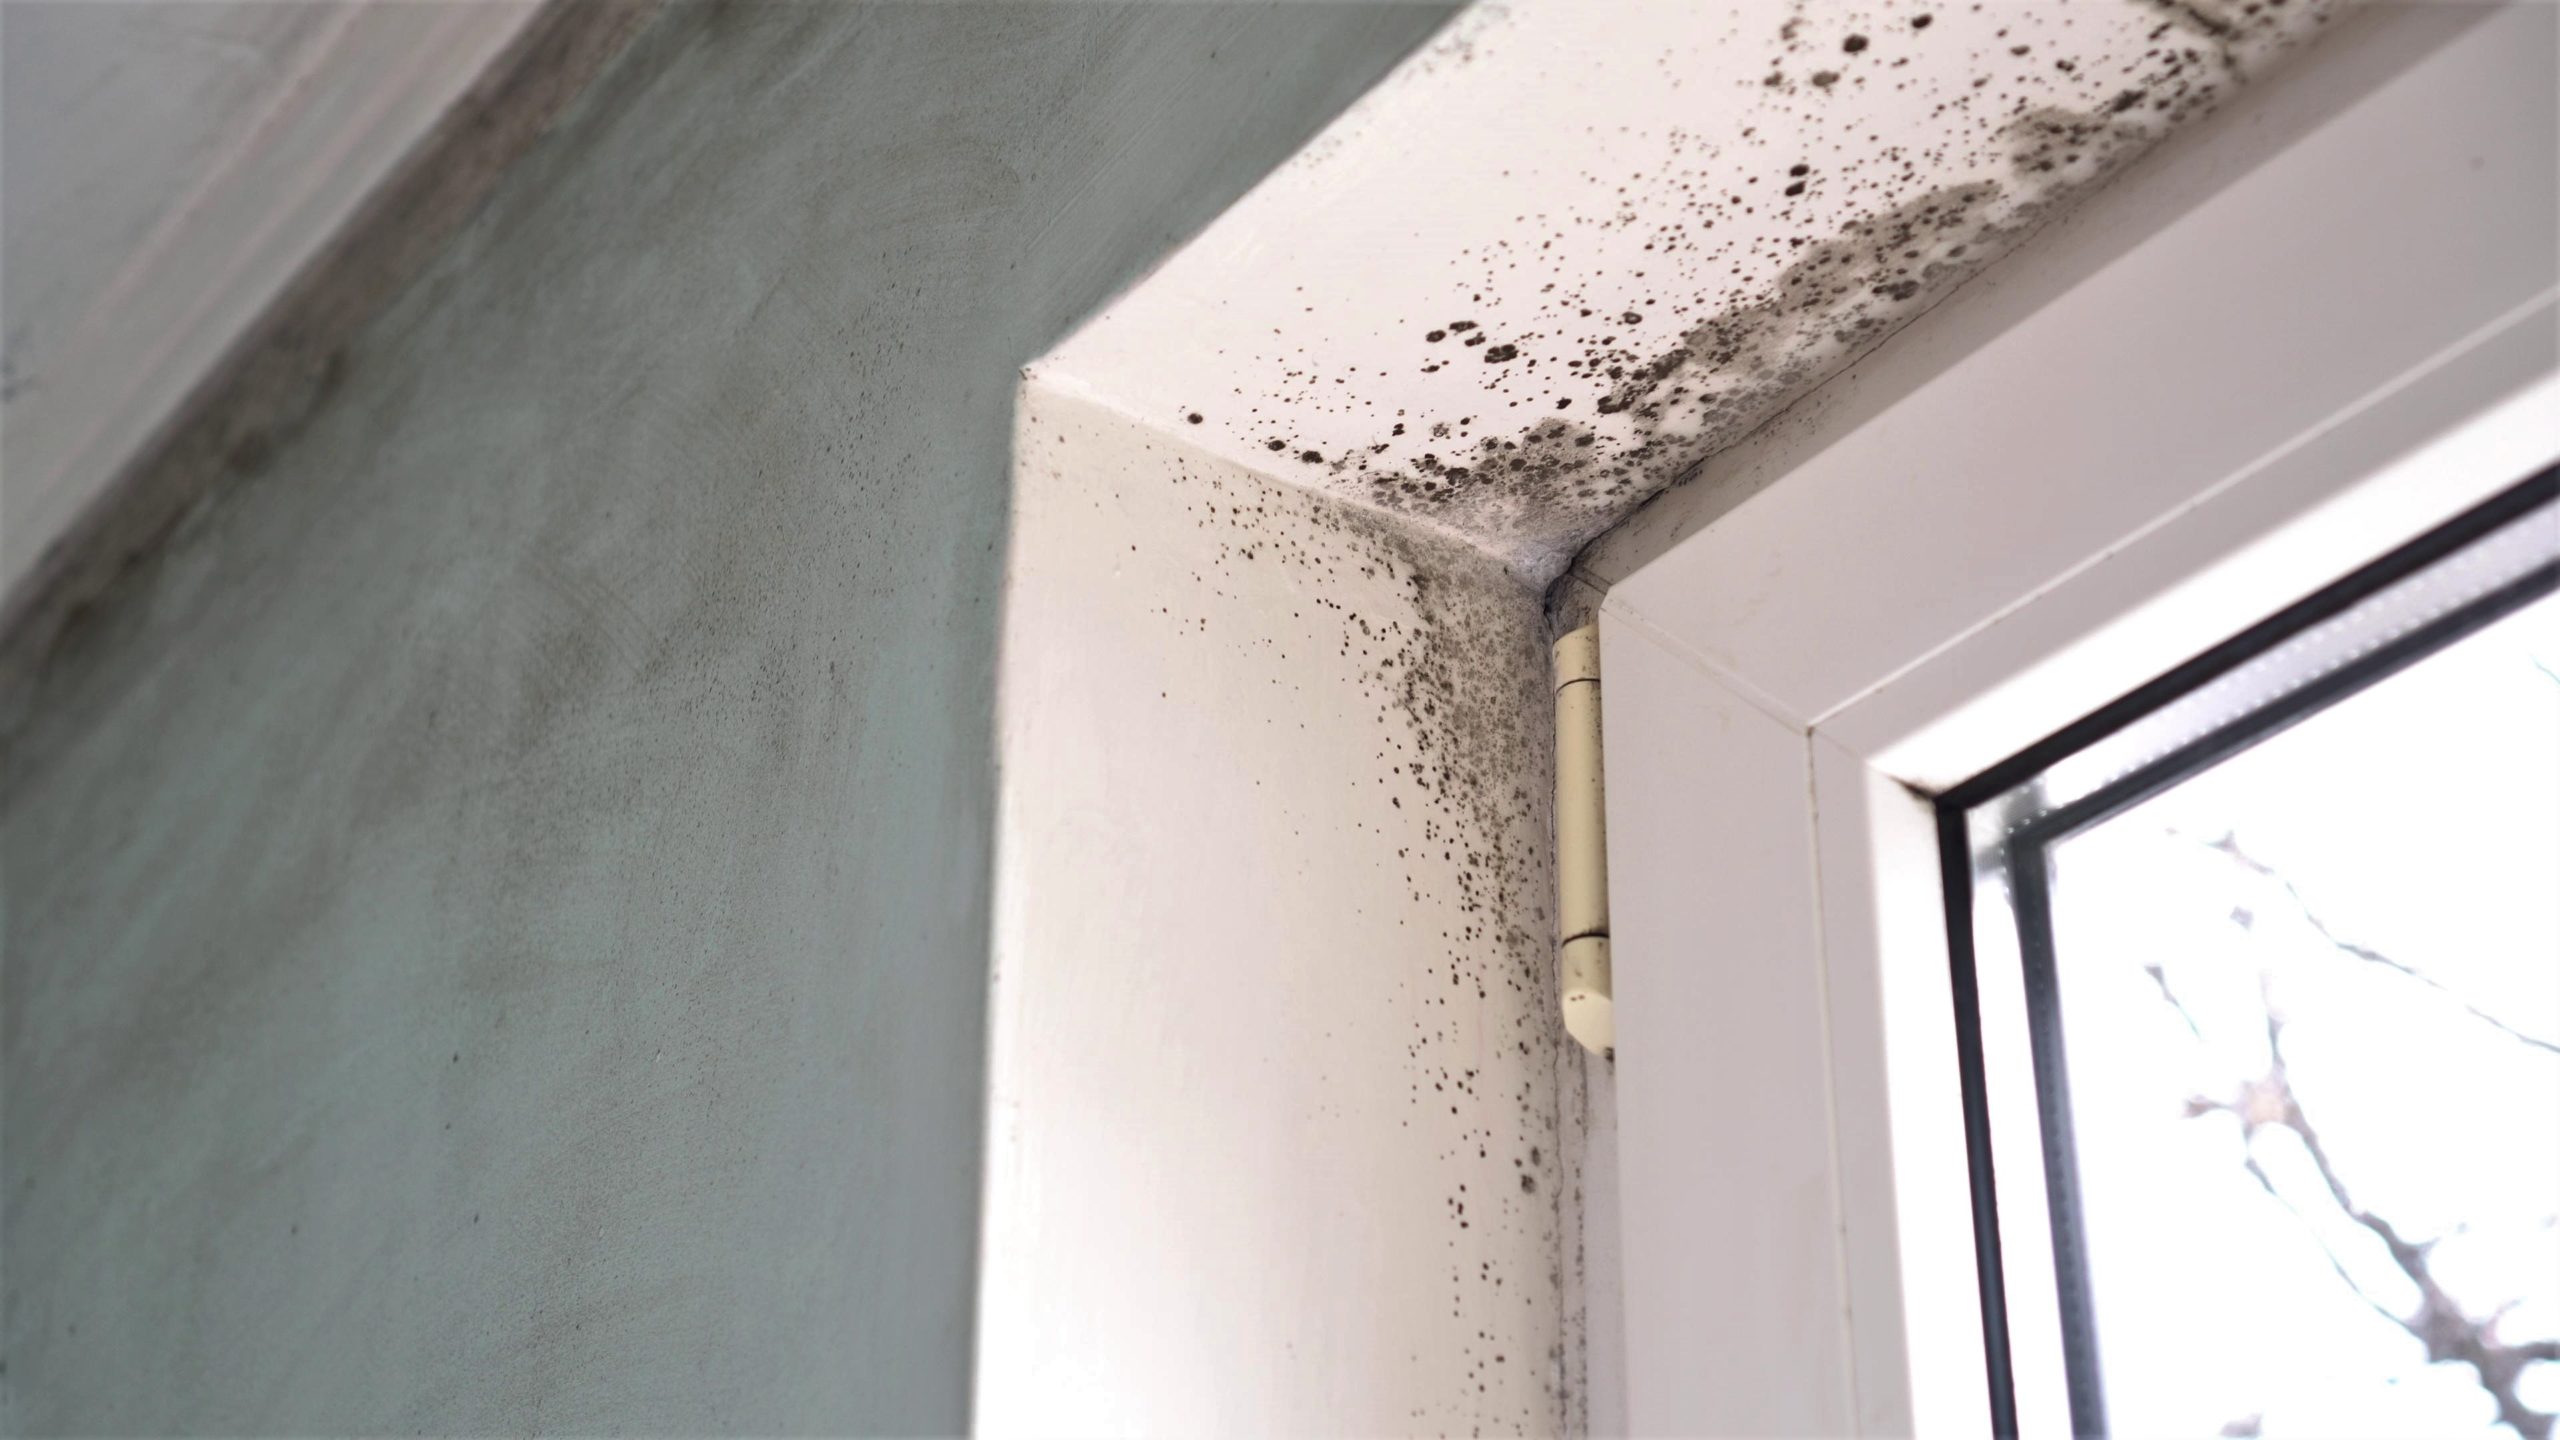 Example of damp and mould